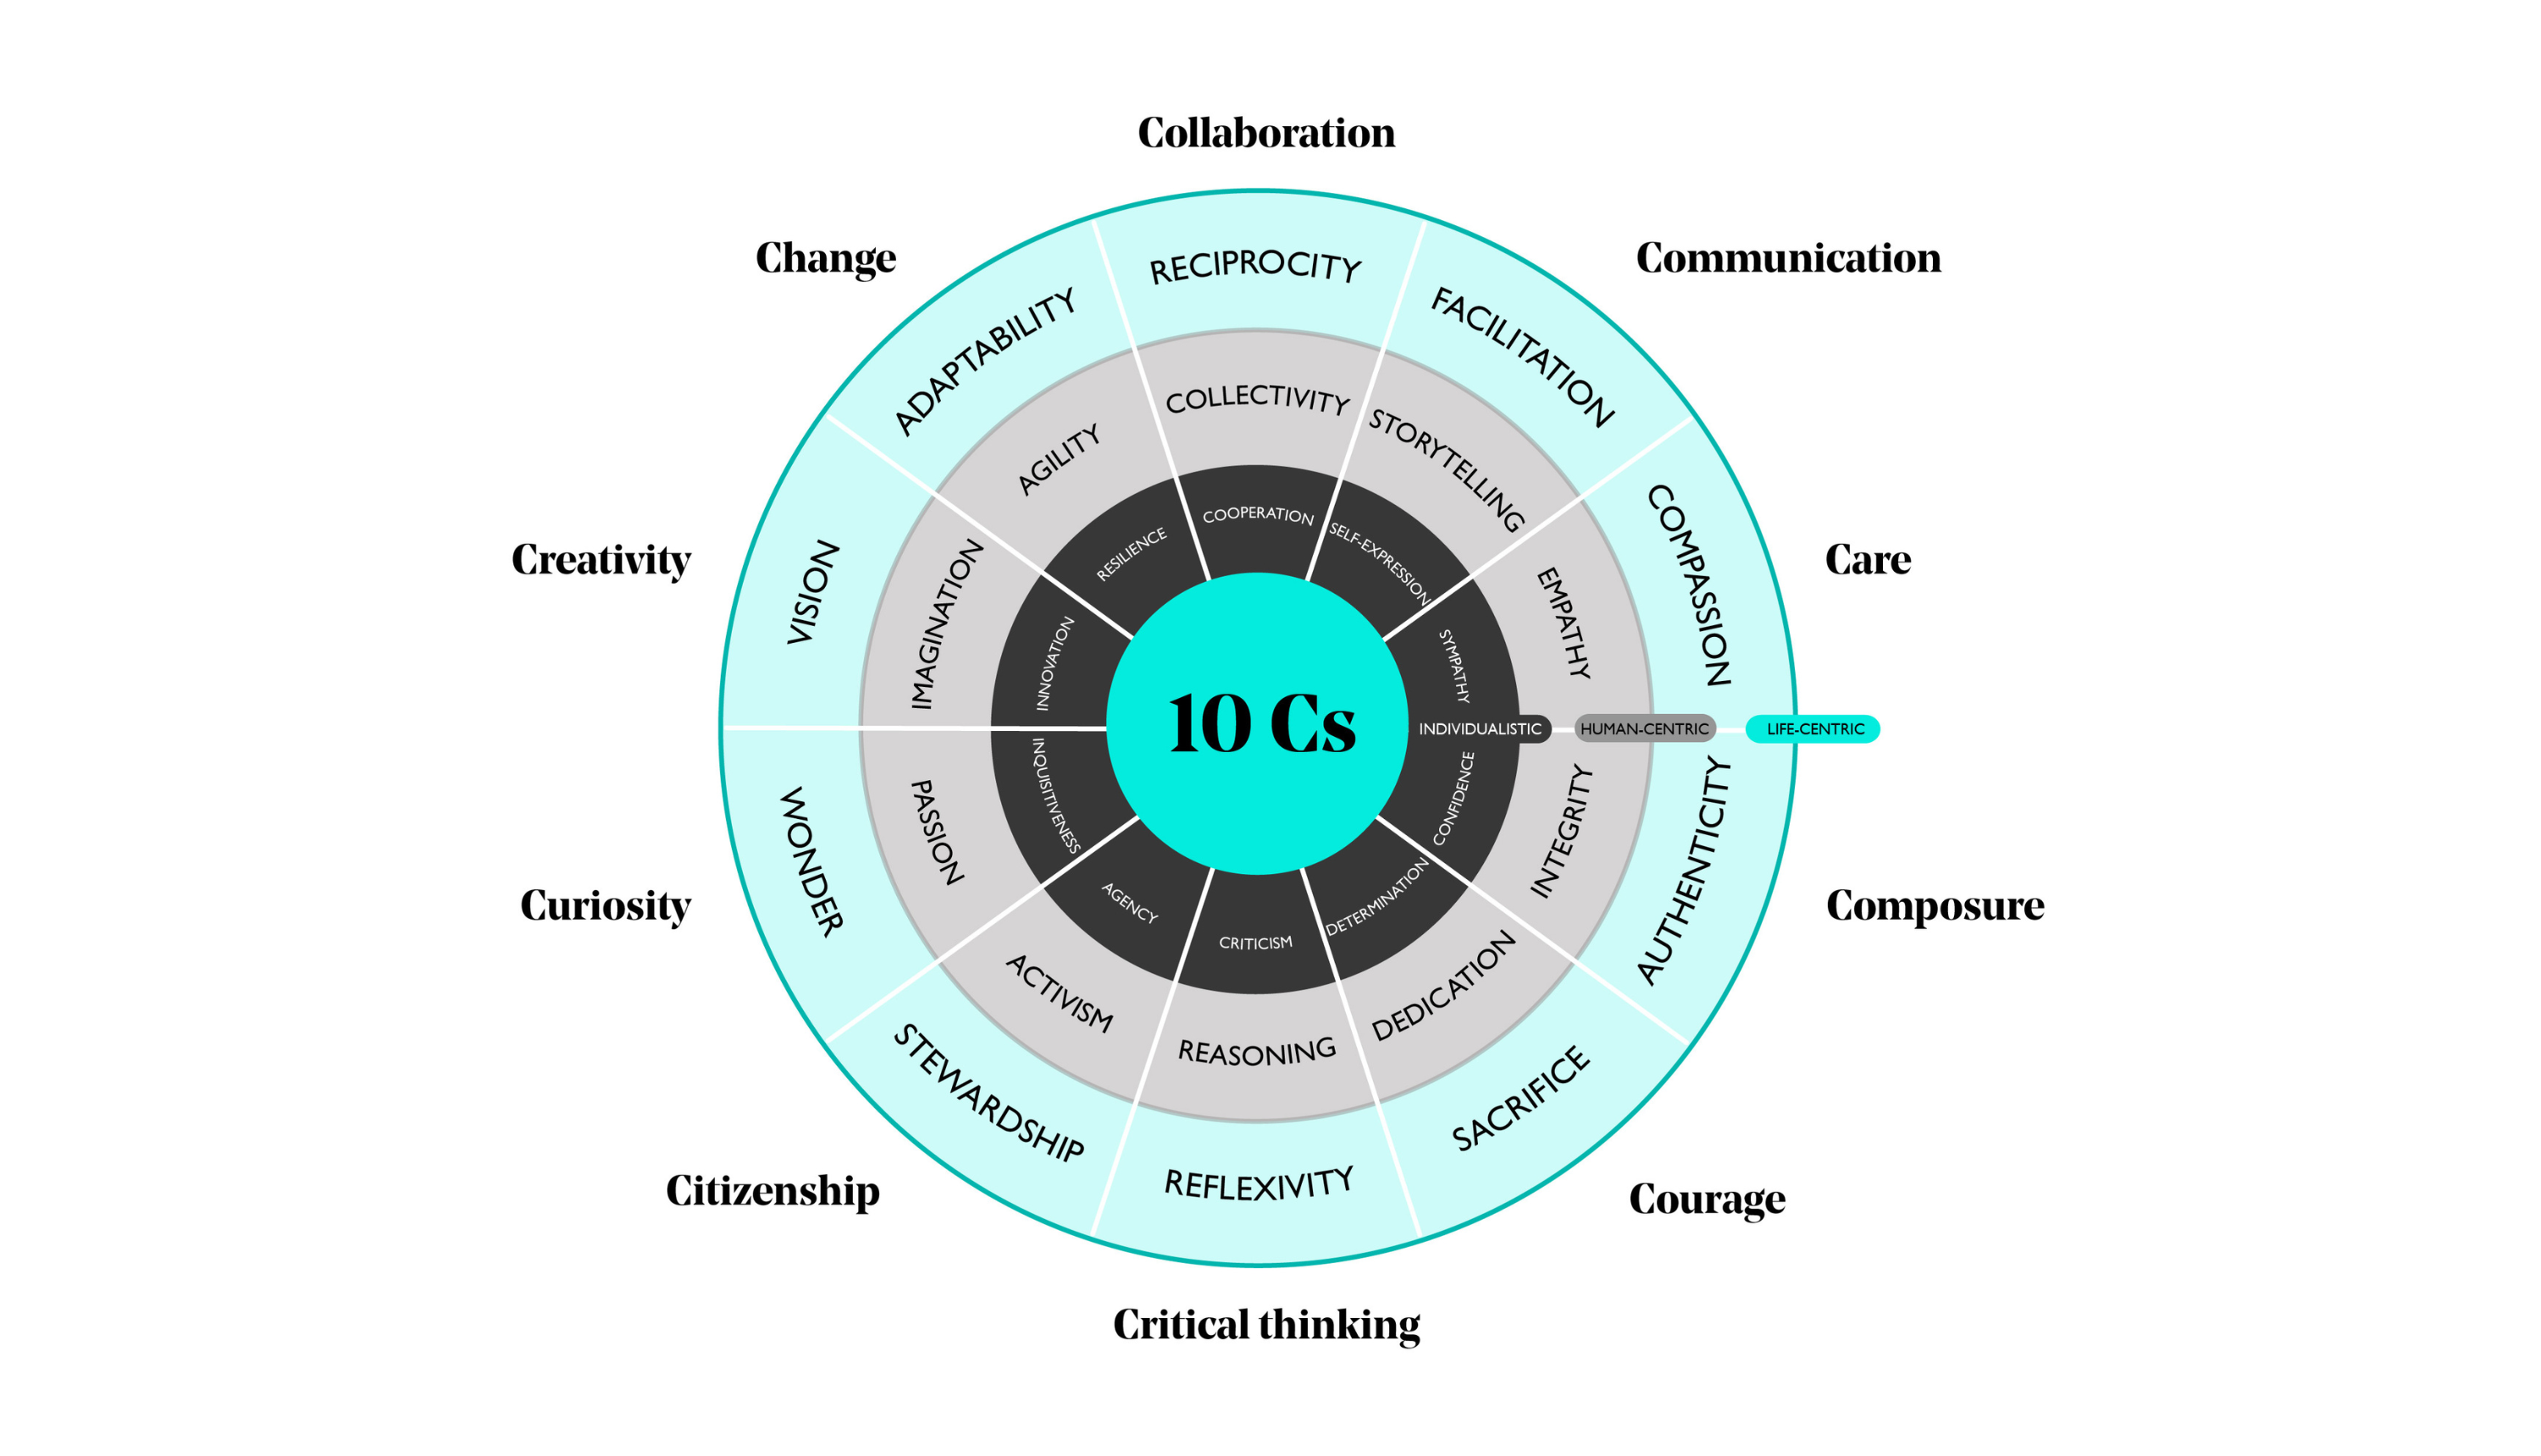 The ten c capability wheel. It is made up of four concentric circles divided into ten wedges. The wheel has ten Cs written in bold in the centre and each wedge signifies one of the ten capabilities. These ten capabilities starting from the top and going around the right or clockwise are: collaboration, communication, care, composure, courage, critical thinking, citizenship, curiosity, creativity and change. Each capability wedge is further divided into three ways in which they show up based on the worldview that someone applies when practicing these capabilities. The three worldviews that the blog and this image talk about are individualistic, human centric and life centric. As an example when an individualistic worldview is applied the capability of collaboration shows up as cooperation, when a human centric worldview is applied collaboration shows up as collectivity, and when a life centric worldview is applied collaboration shows up as reciprocity.